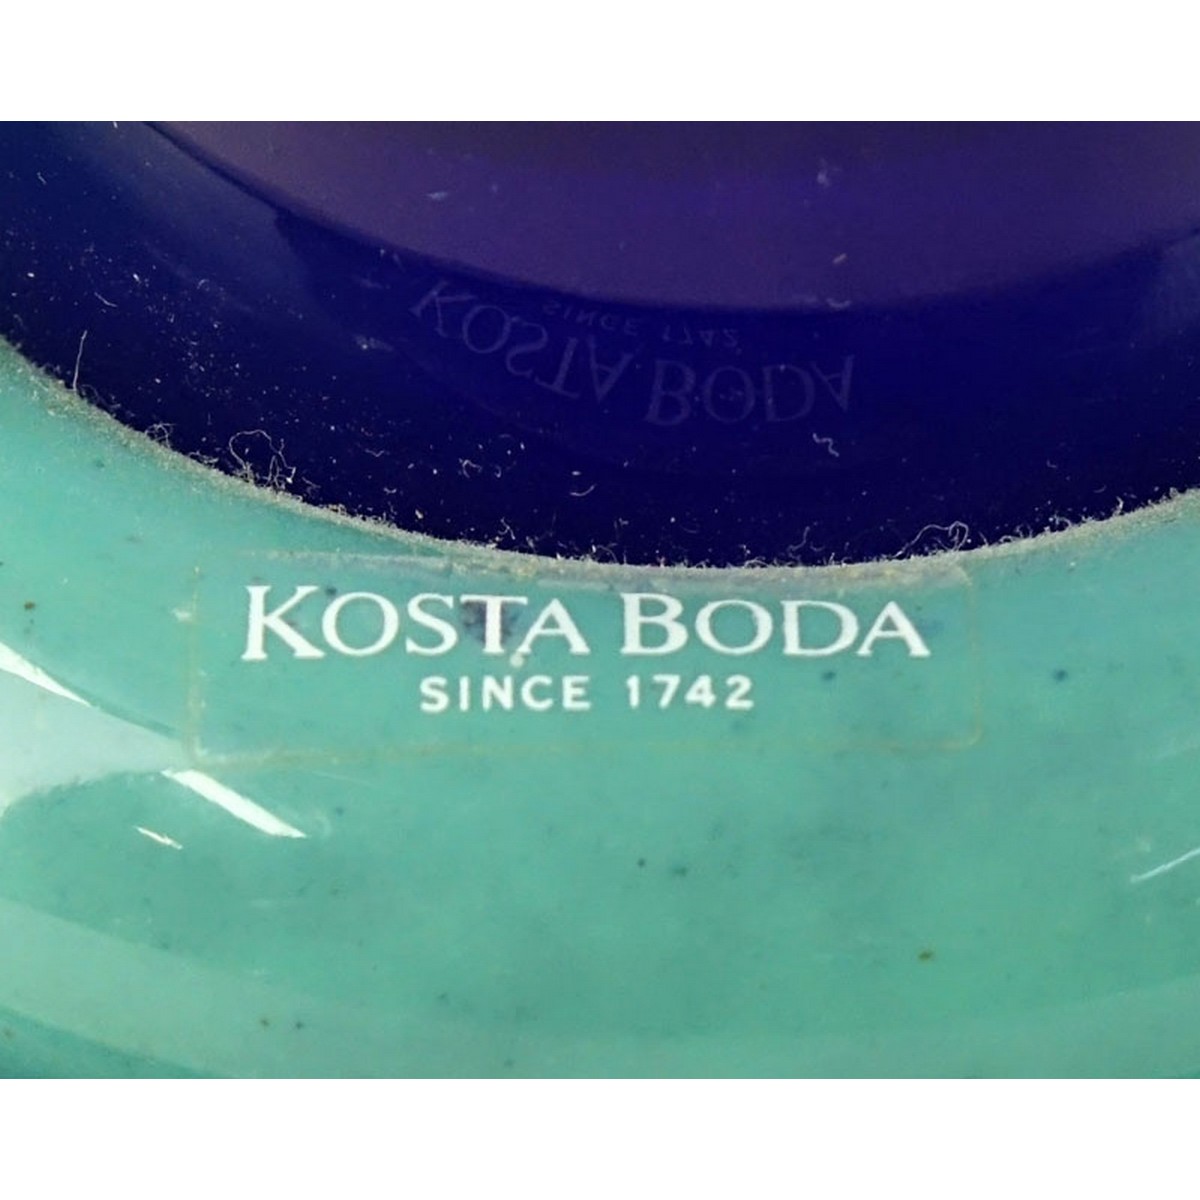 Large Kosta Boda Art Glass Compote by Kjell Engman. Signed and original sticker label attached.